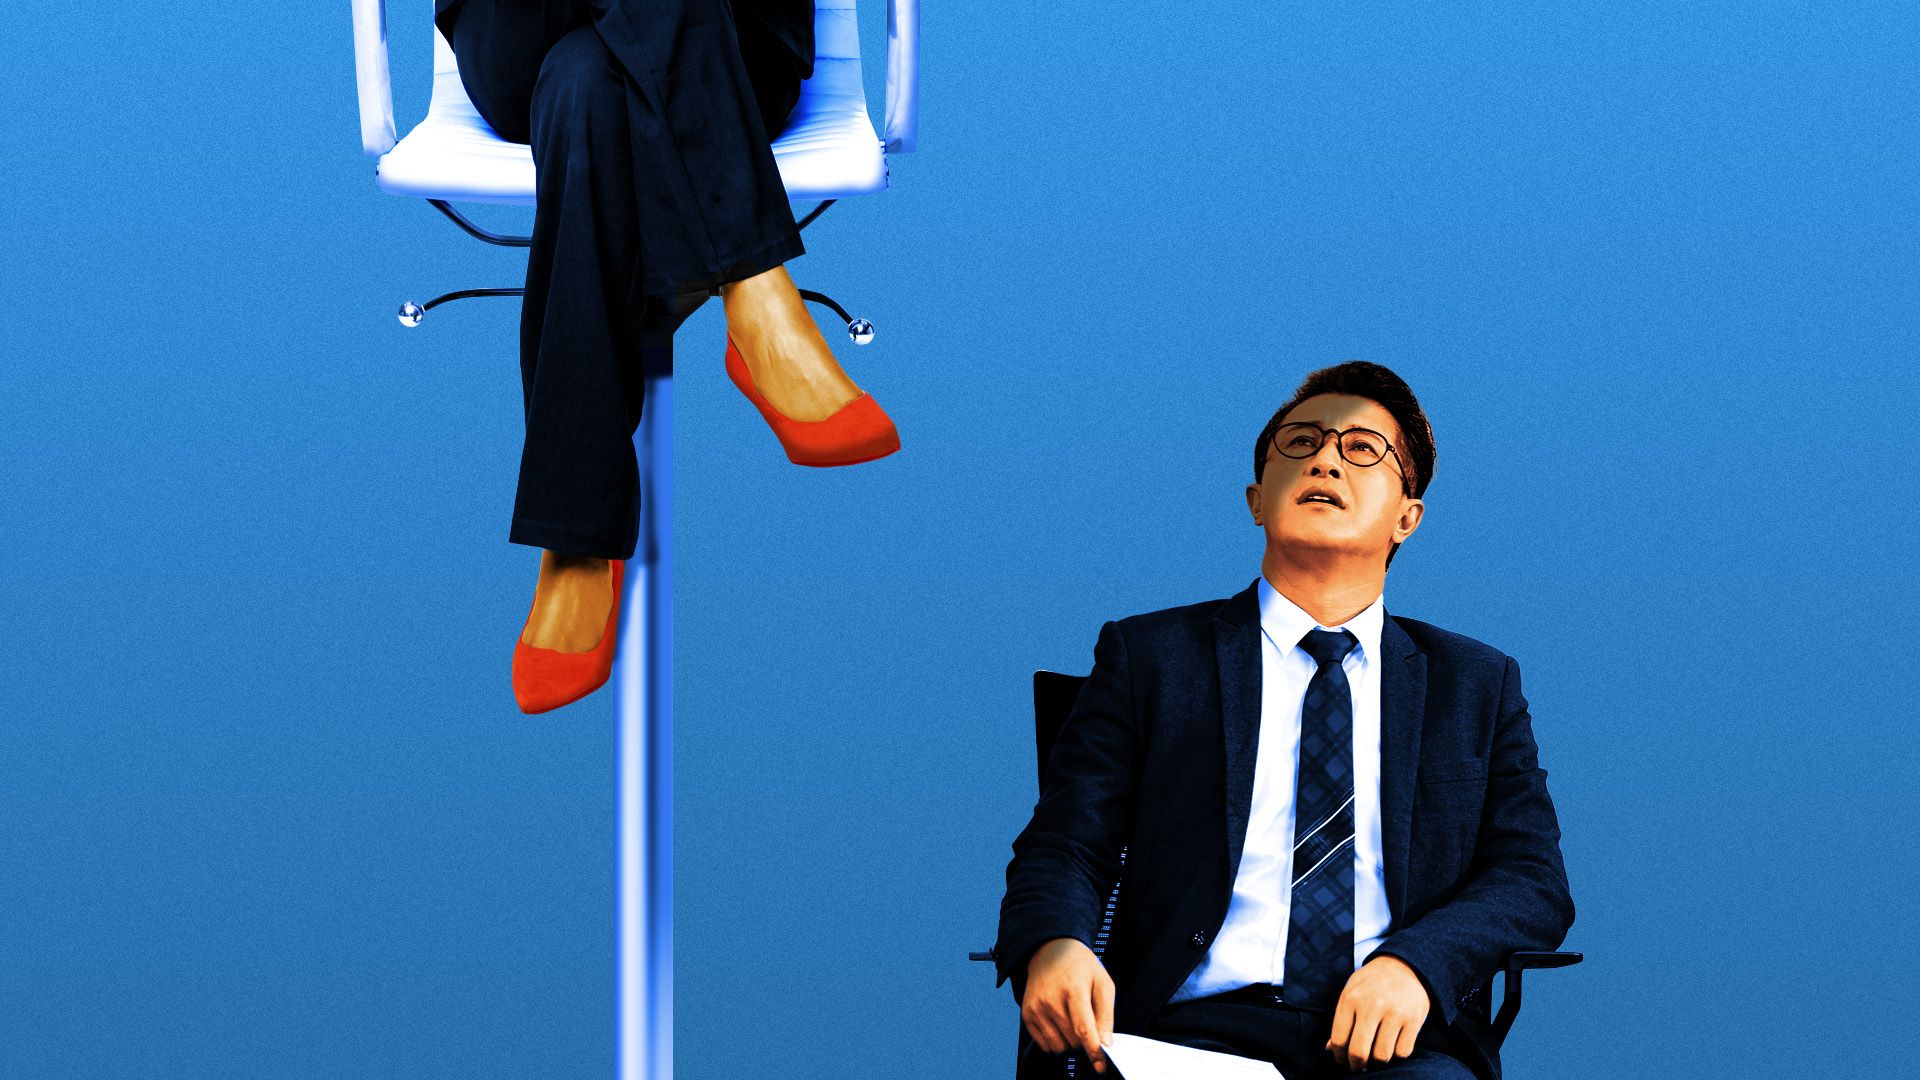 Illustration of an employee in an office chair that's positioned way above the boss below